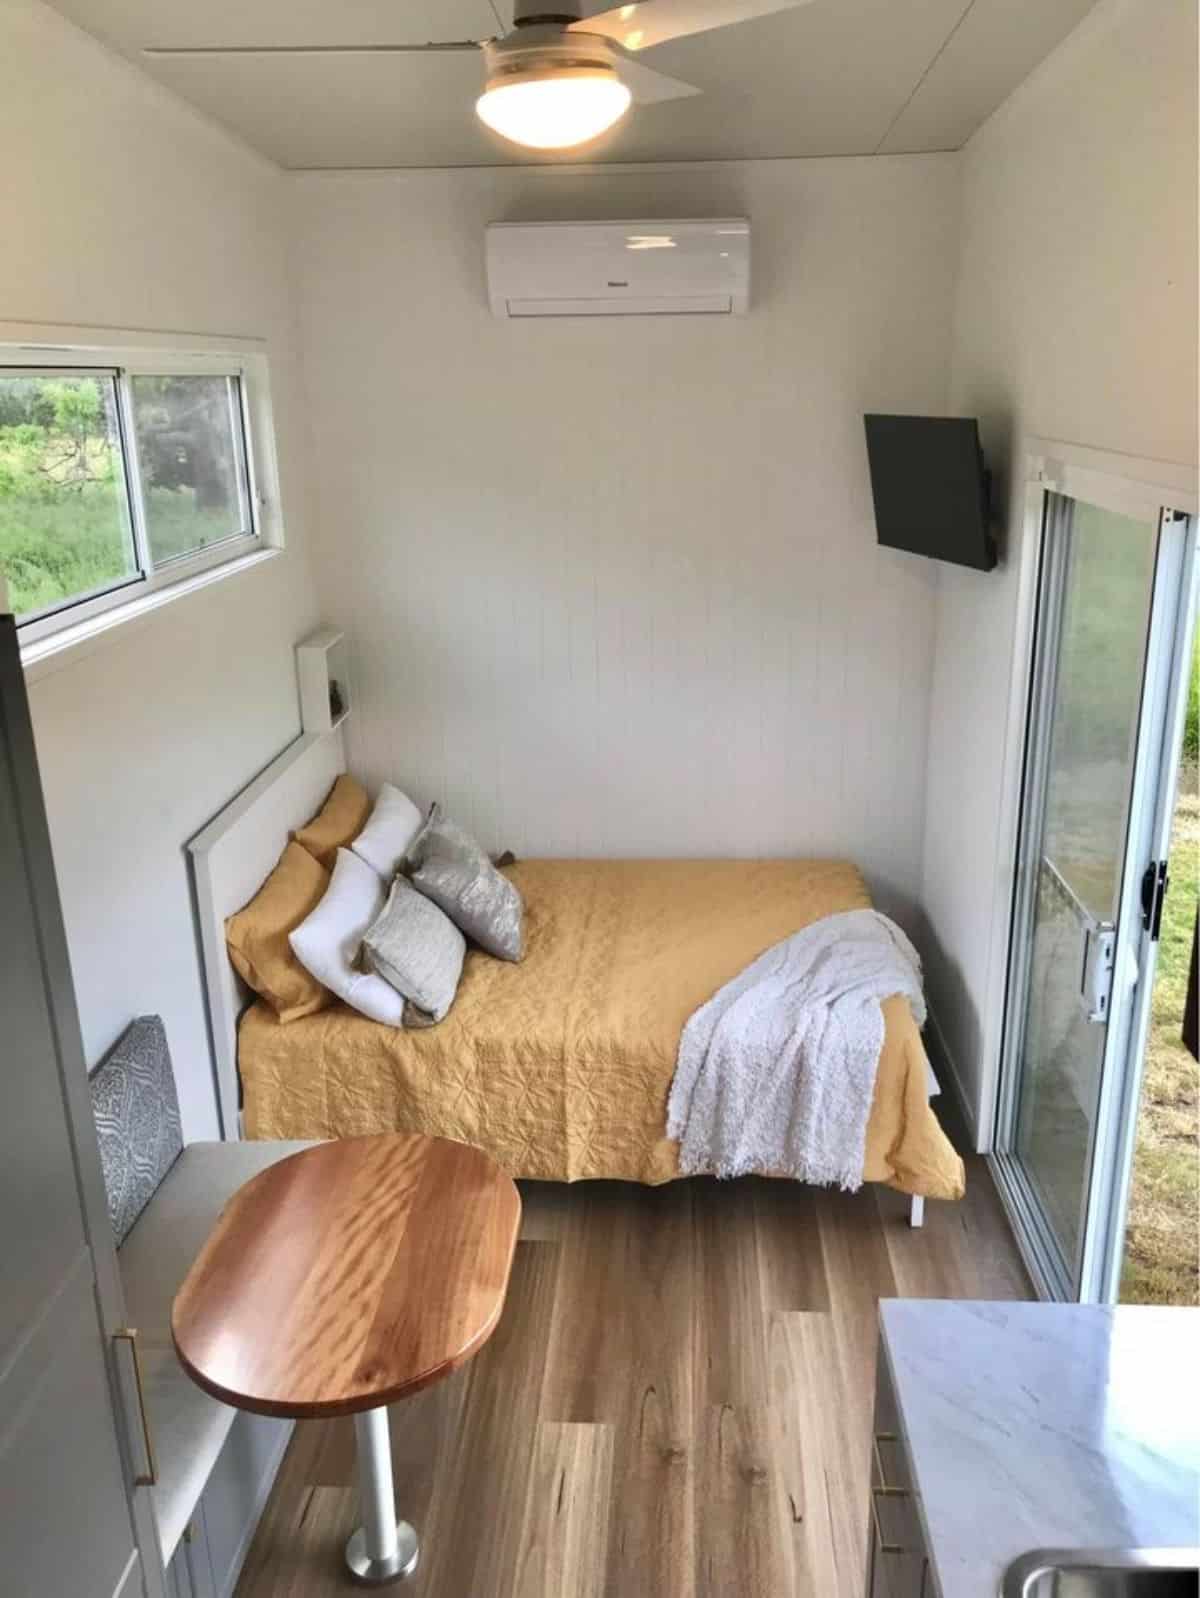 Open bedroom with comfortable double bed and wall mounted TV set in open area of furnished tiny house